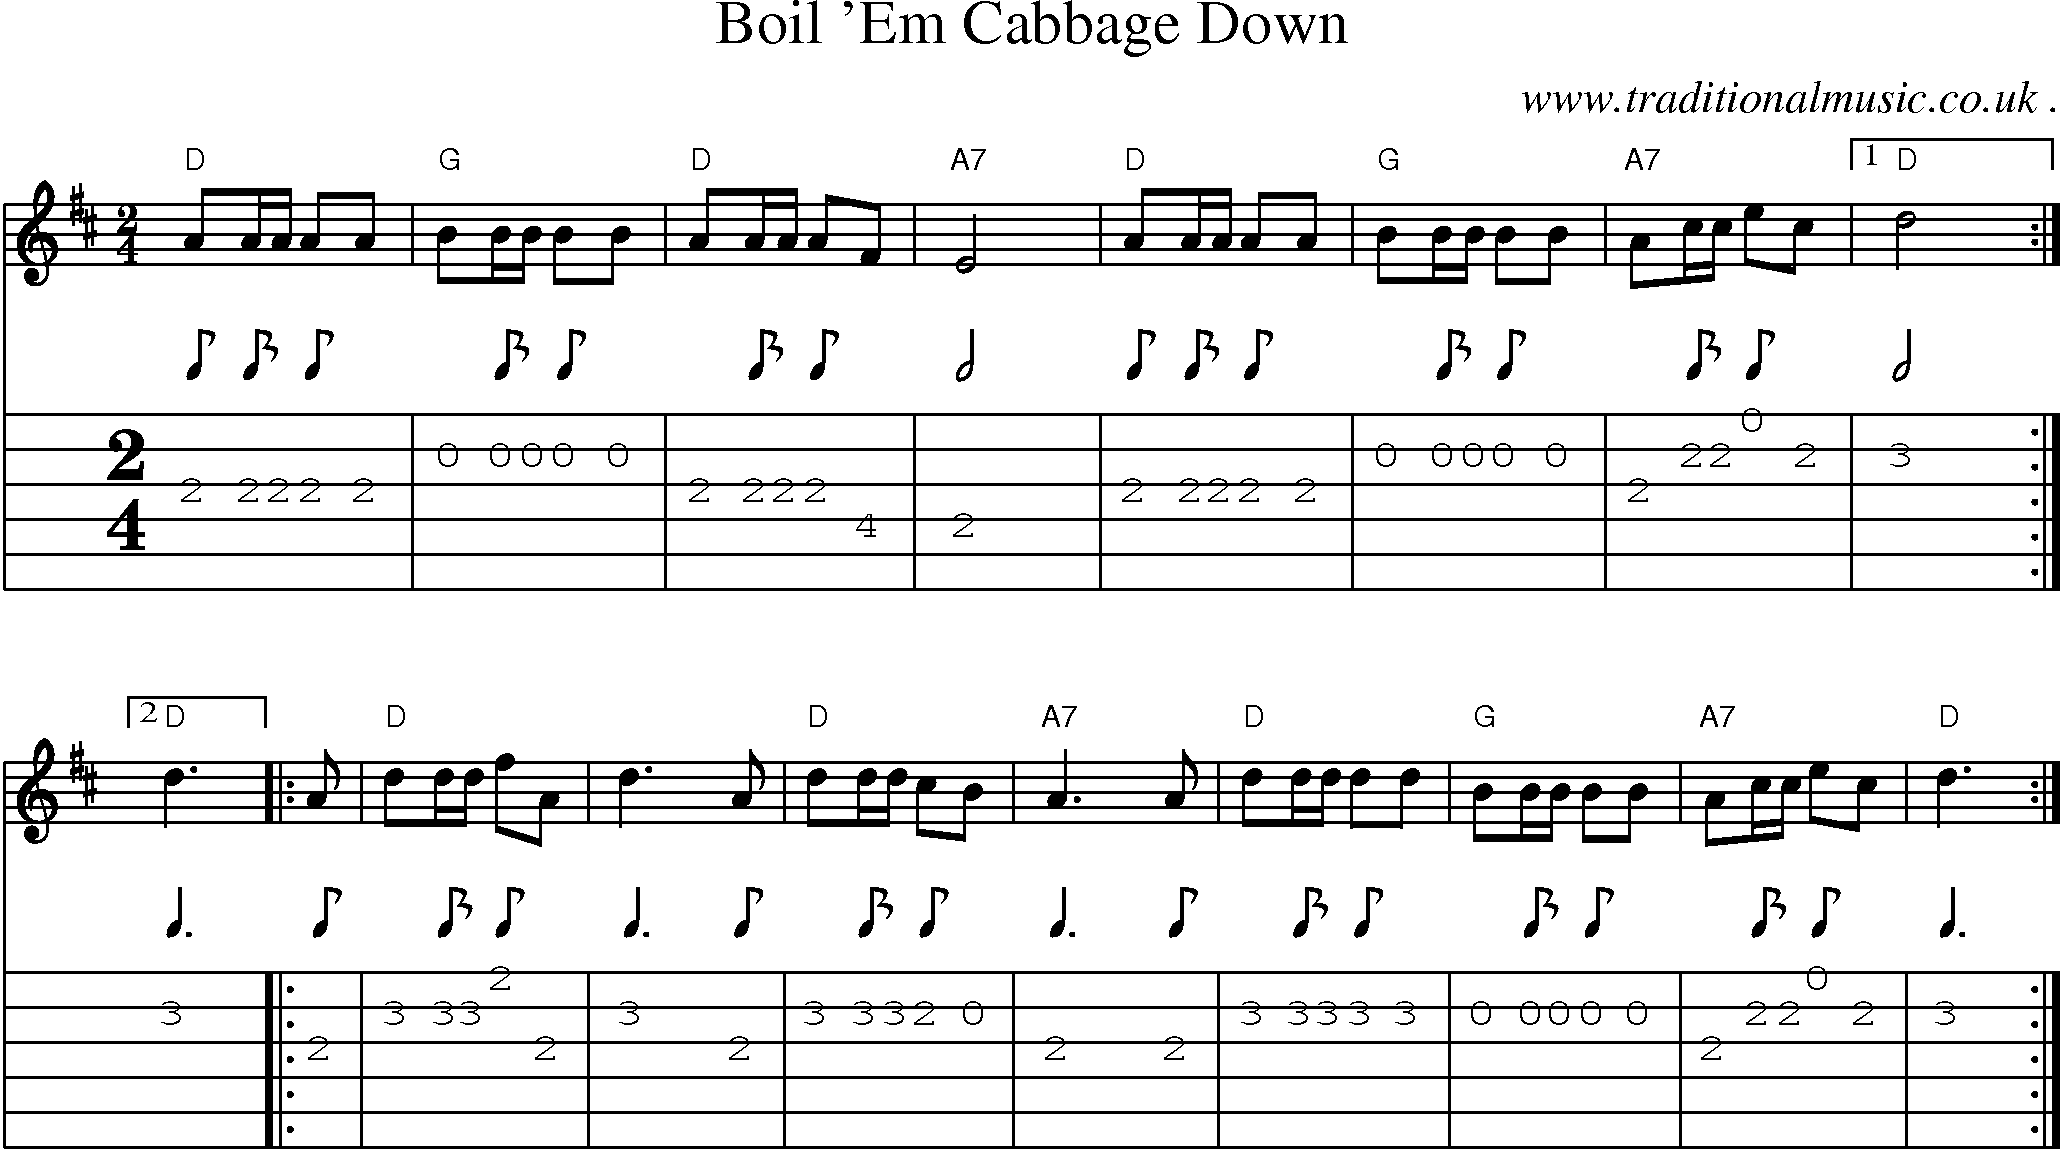 Sheet-Music and Guitar Tabs for Boil Em Cabbage Down